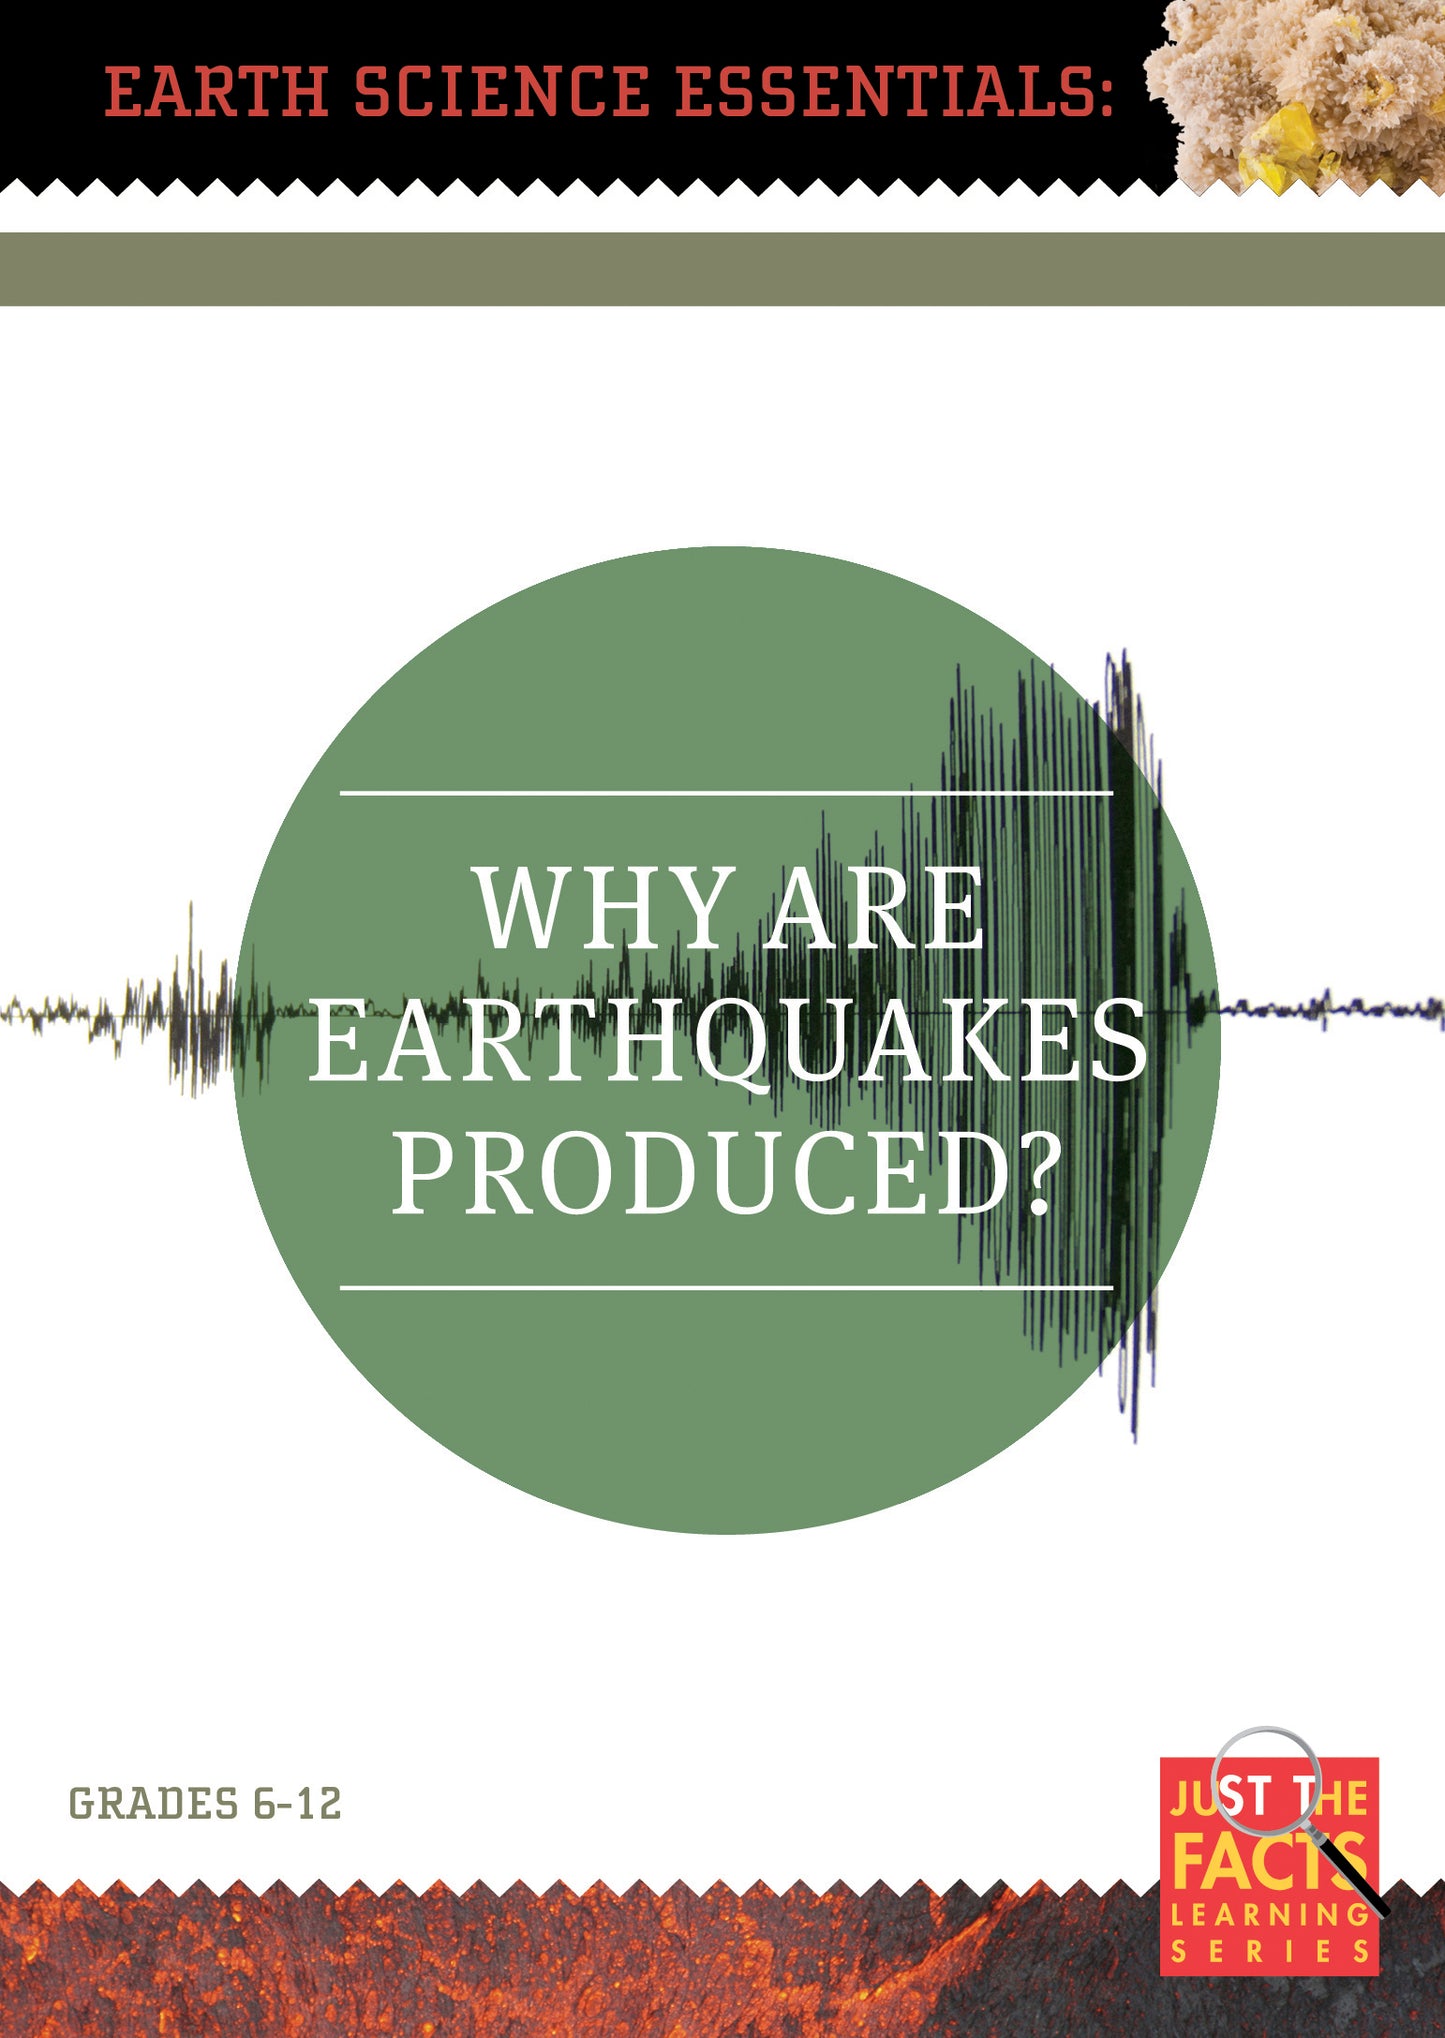 Earth Science Essentials: Why Are Earthquakes Produced? cover art